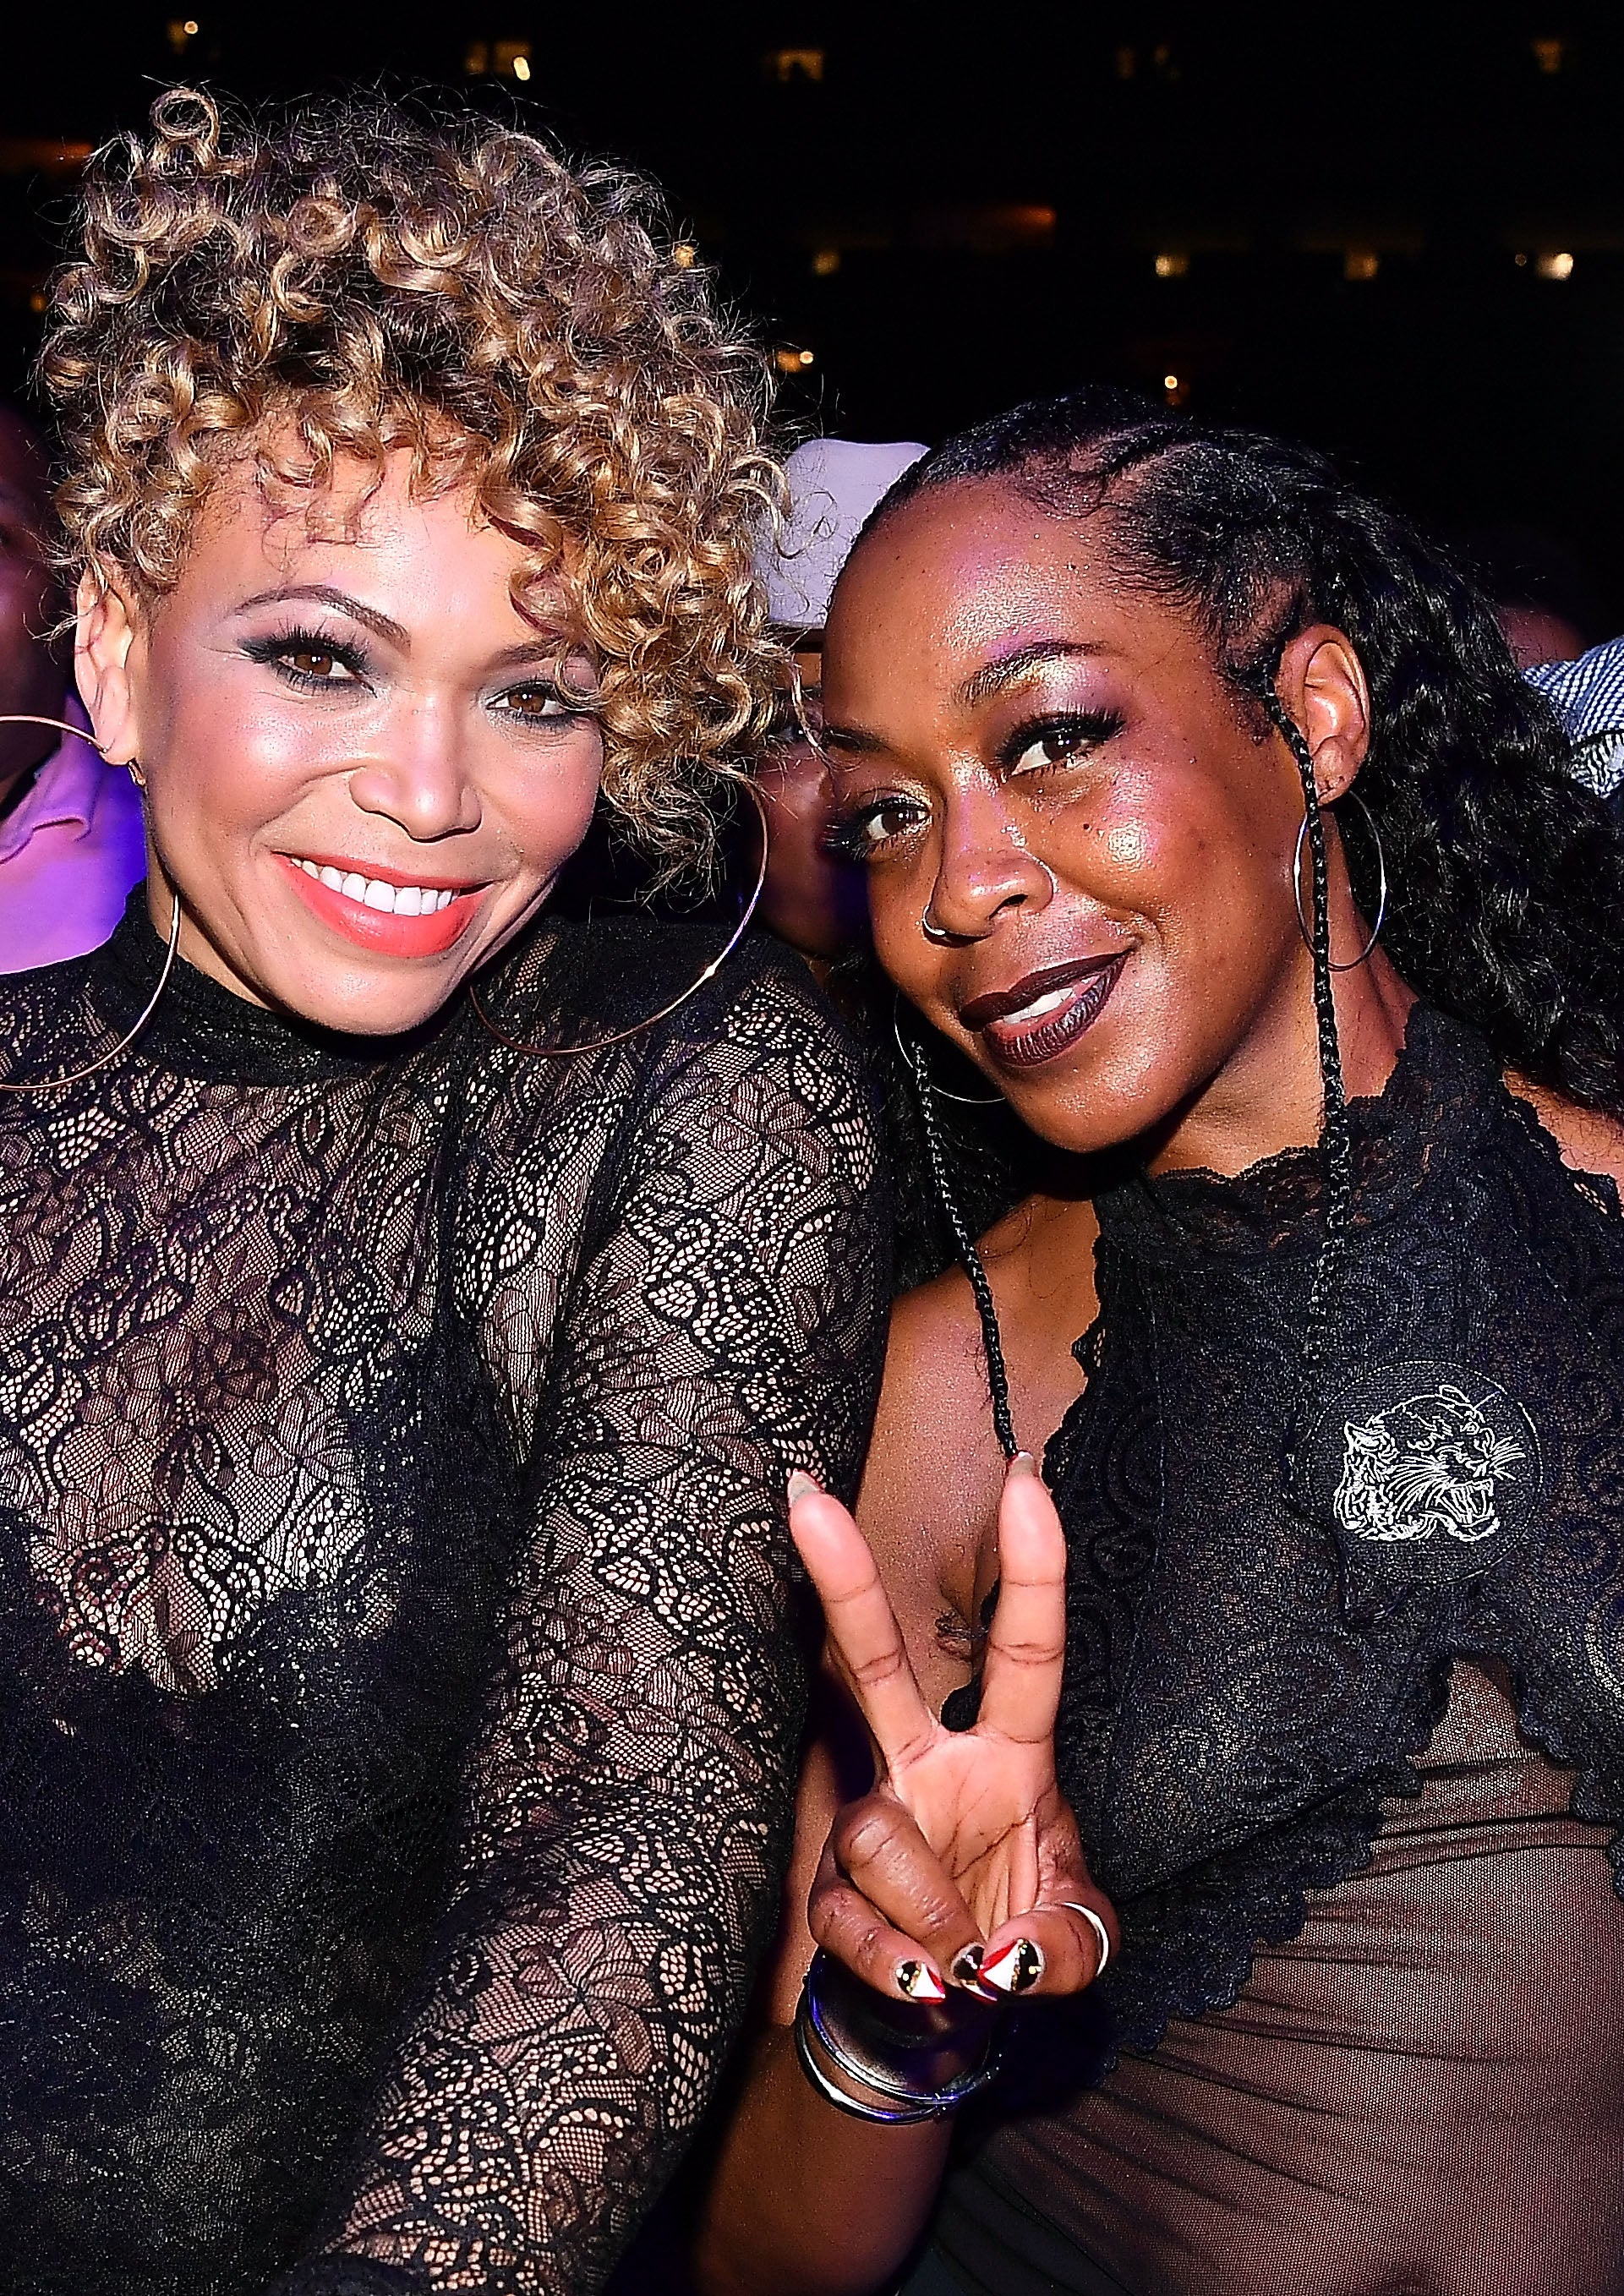 Tisha Campbell And Tichina Arnold Speak On Their Friendship With Kim Porter, Hosting The Soul Train Awards And More